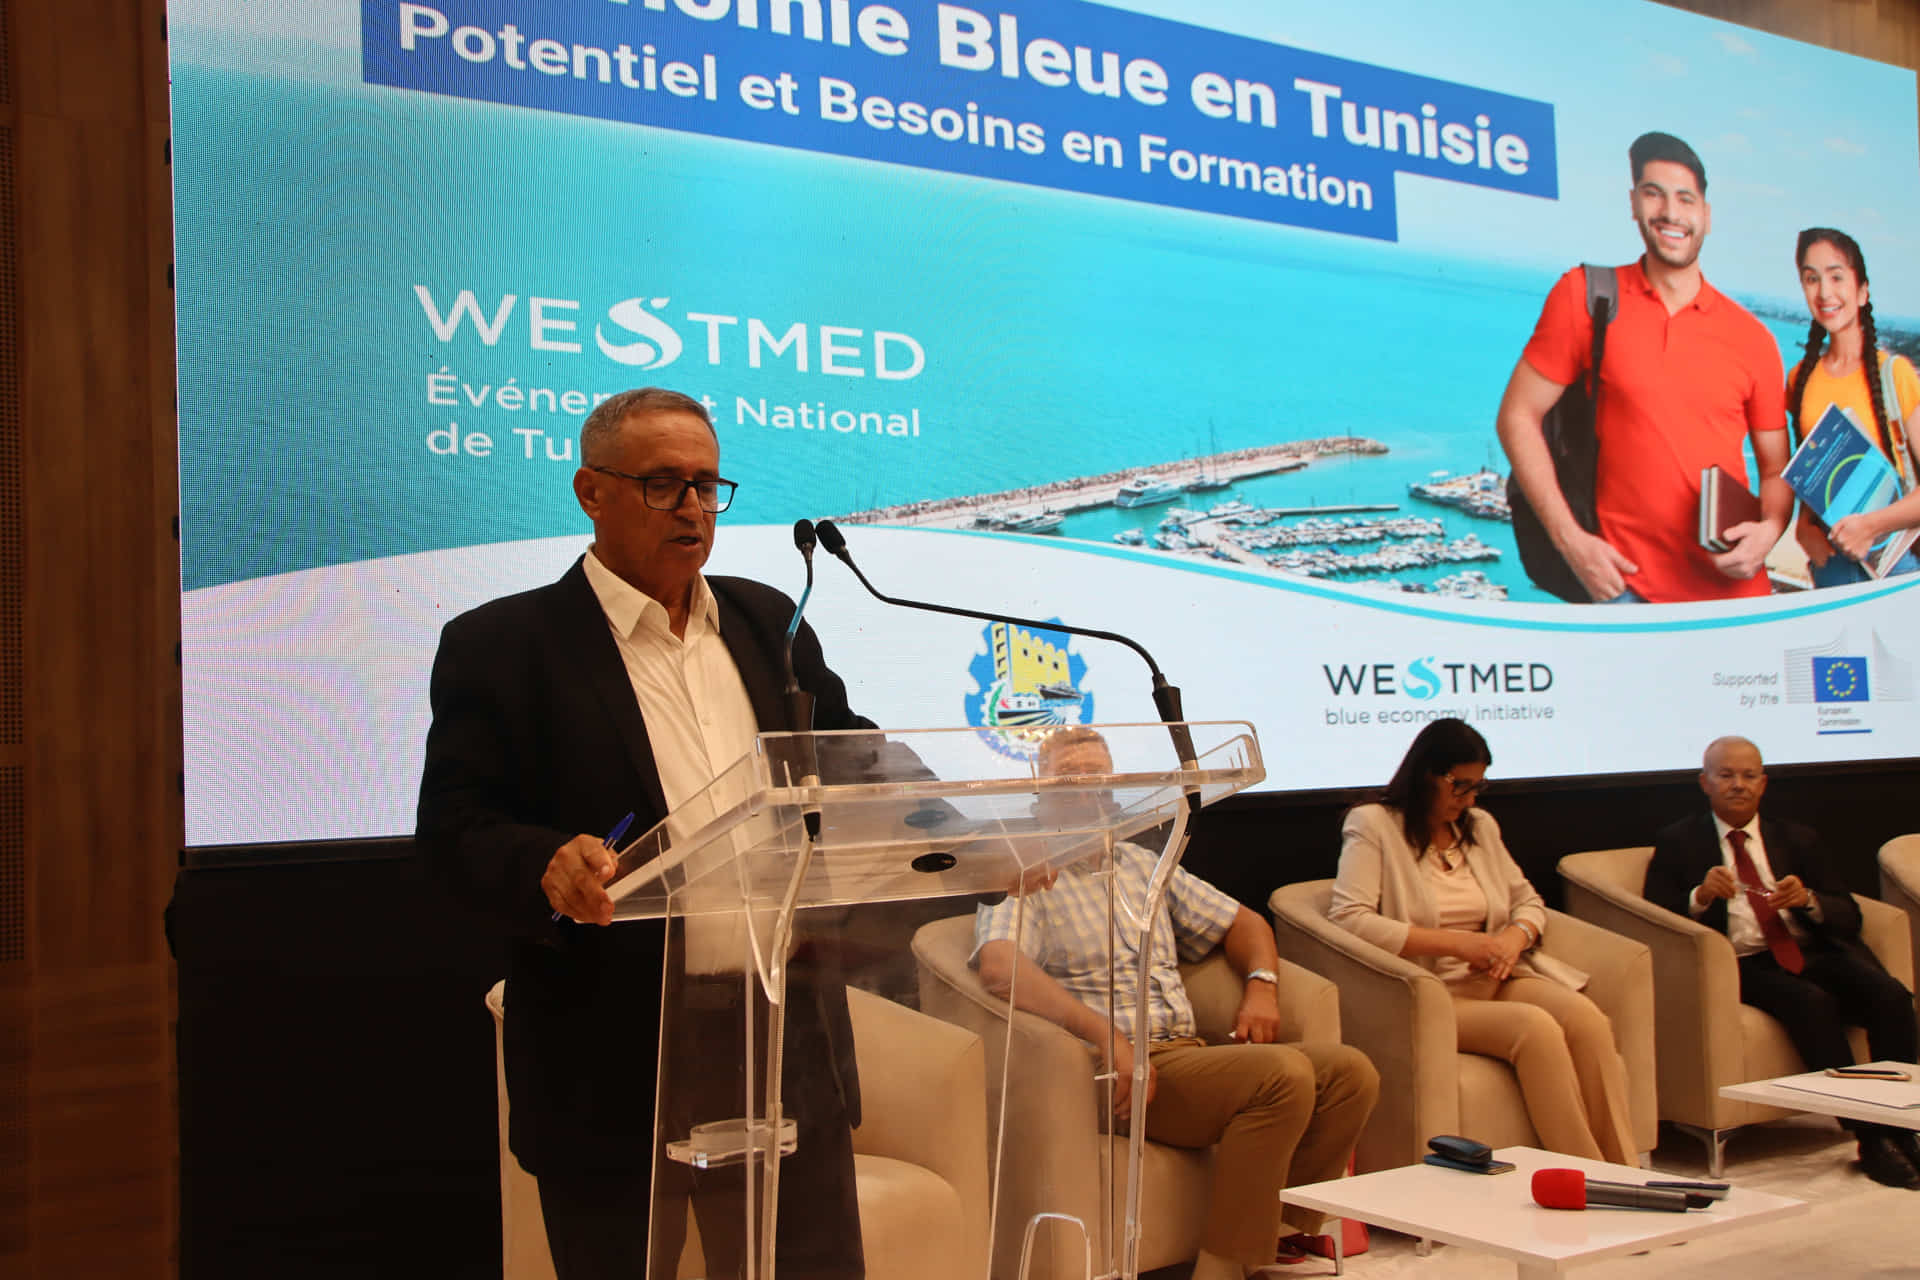 speaker on stahe during WestMED National event Tunisia 2023 in Sfax